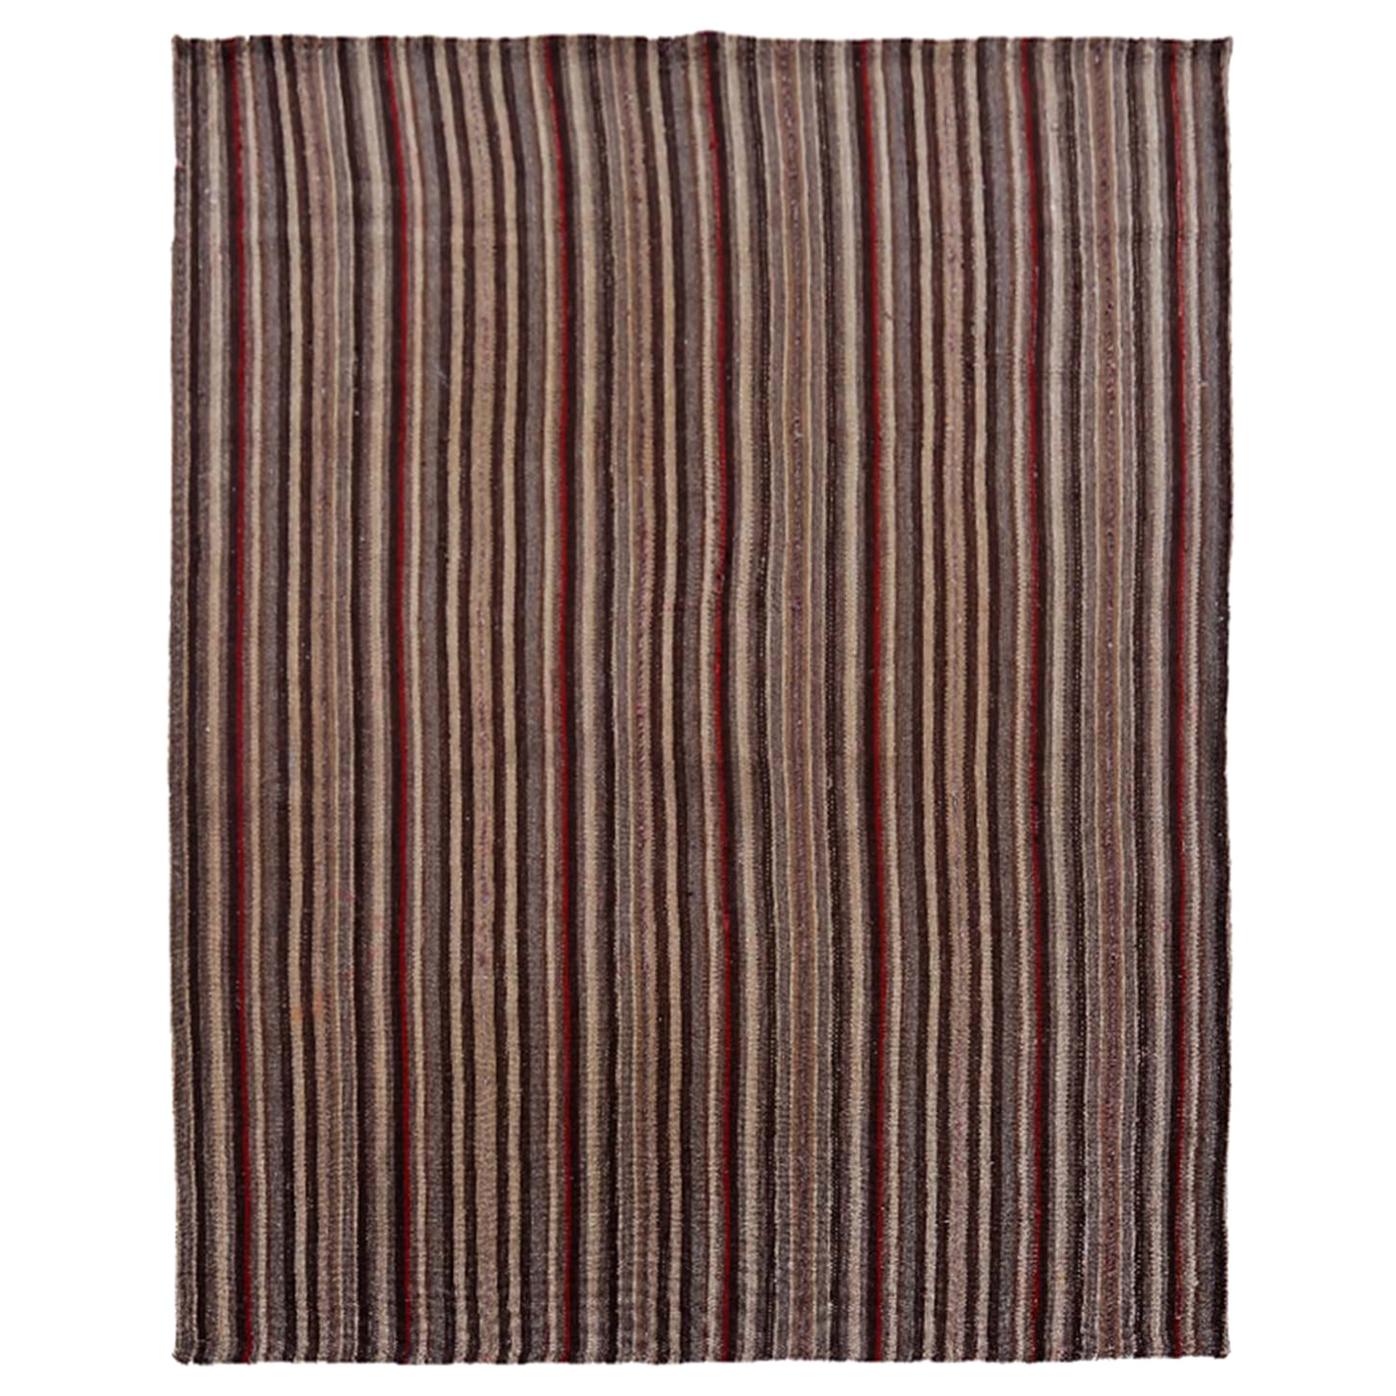 Modern Turkish Kilim Rug with Red, Brown and Beige Stripes For Sale